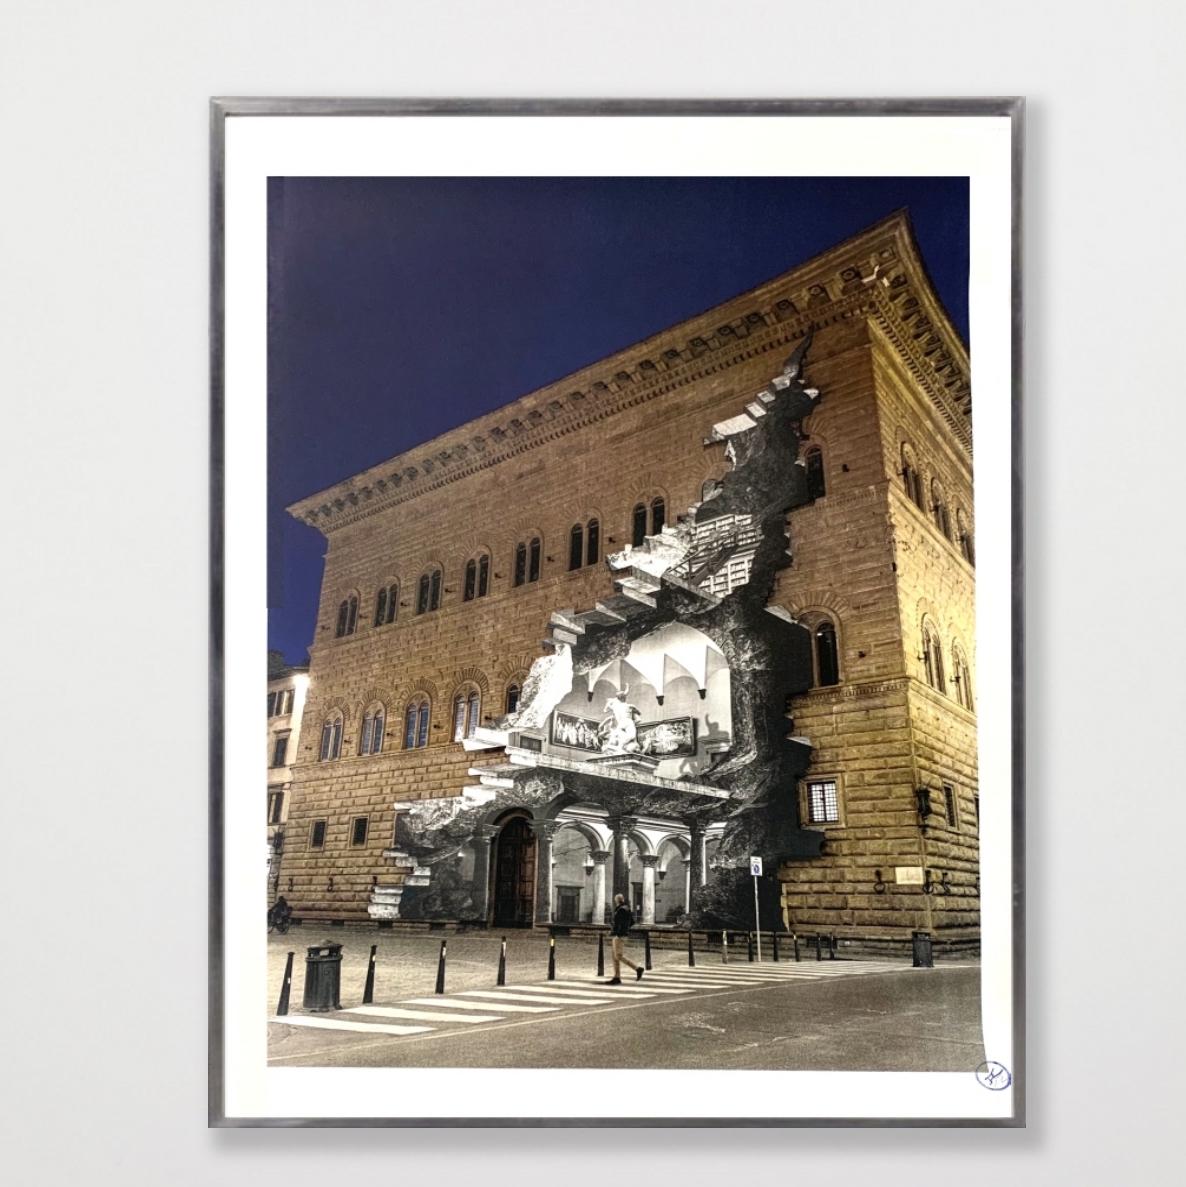 JR
La Ferita, 25 Mars 2021, 19H07, Palazzo Strozzi, Florence, Italie, 2021
100 x 70 cm  (39.3 x 27.5 in.), unframed
14 colors lithograph printed on Marinoni machine
White paper BFK Rives - 300 grammes
Edition of 180
Signed by JR on the bottom right